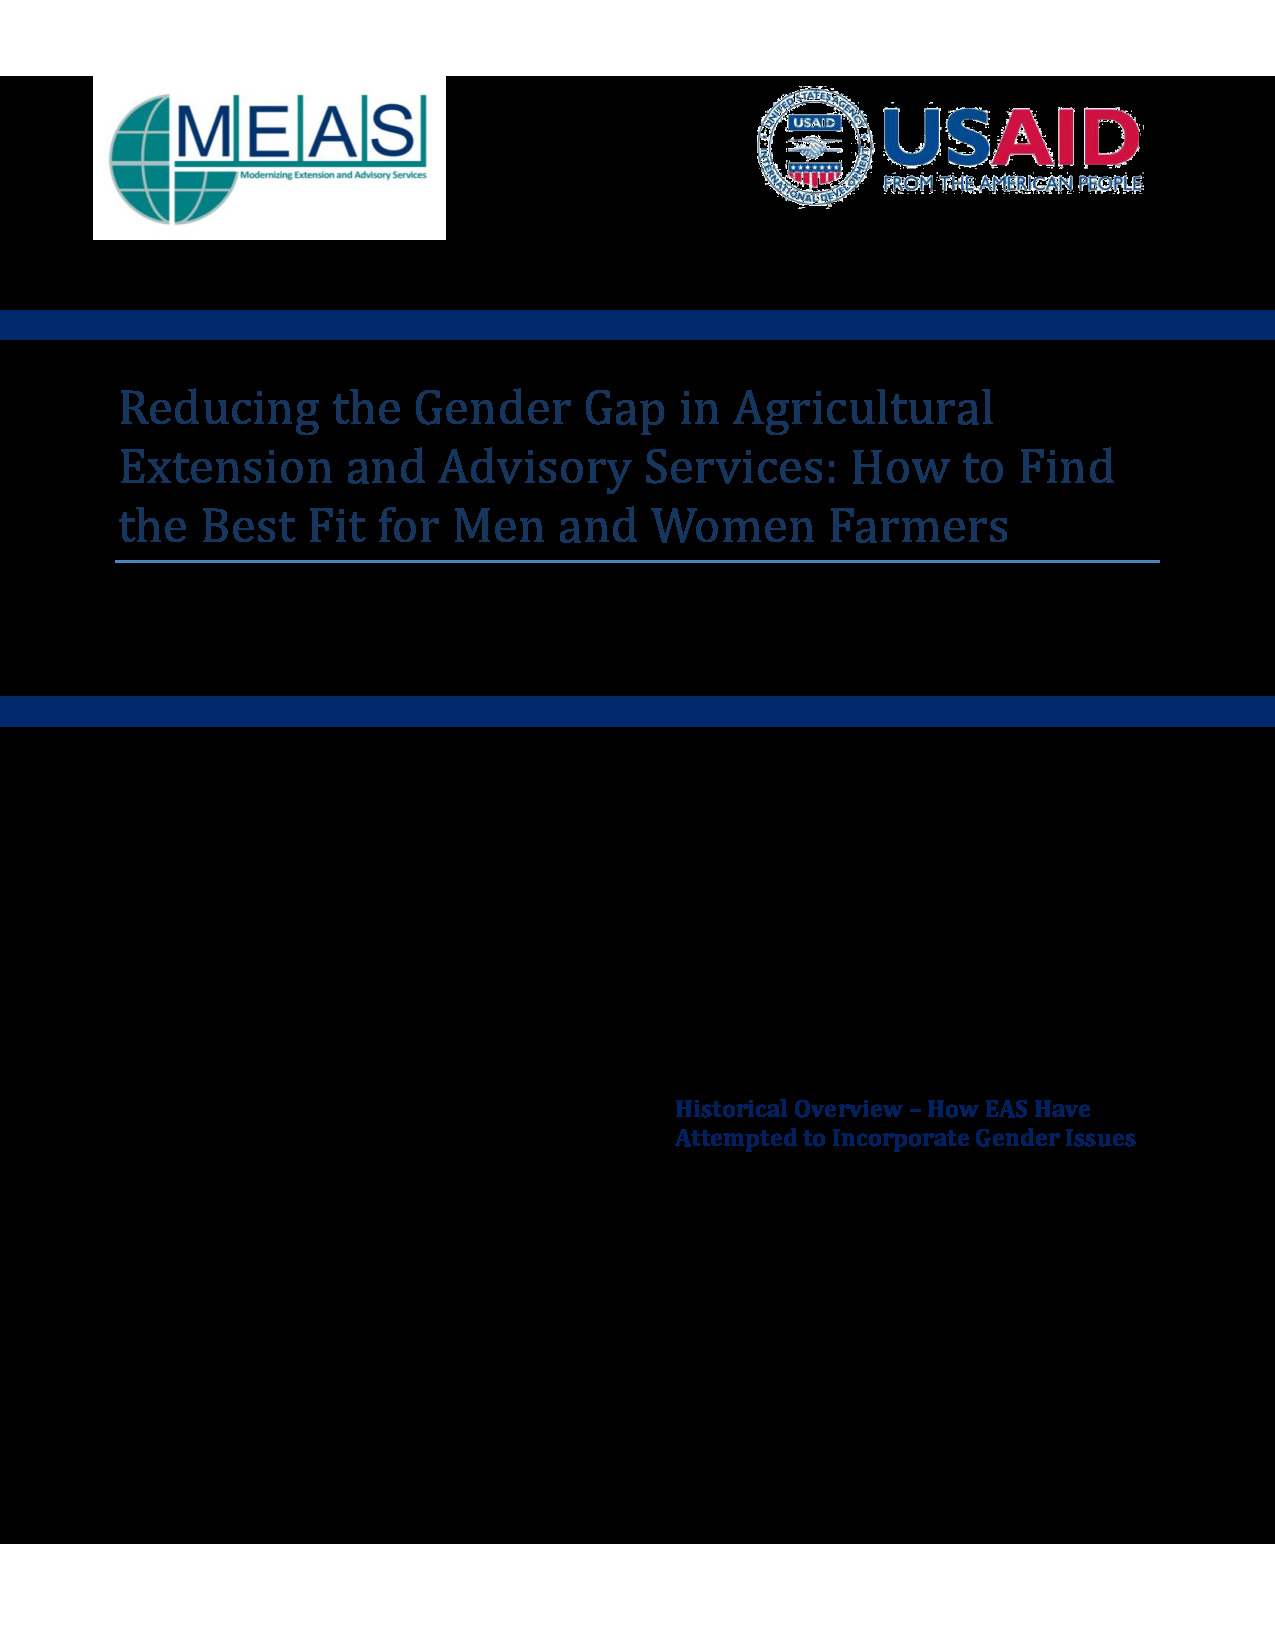 Reducing the gender gap in agricultural extension and advisory services